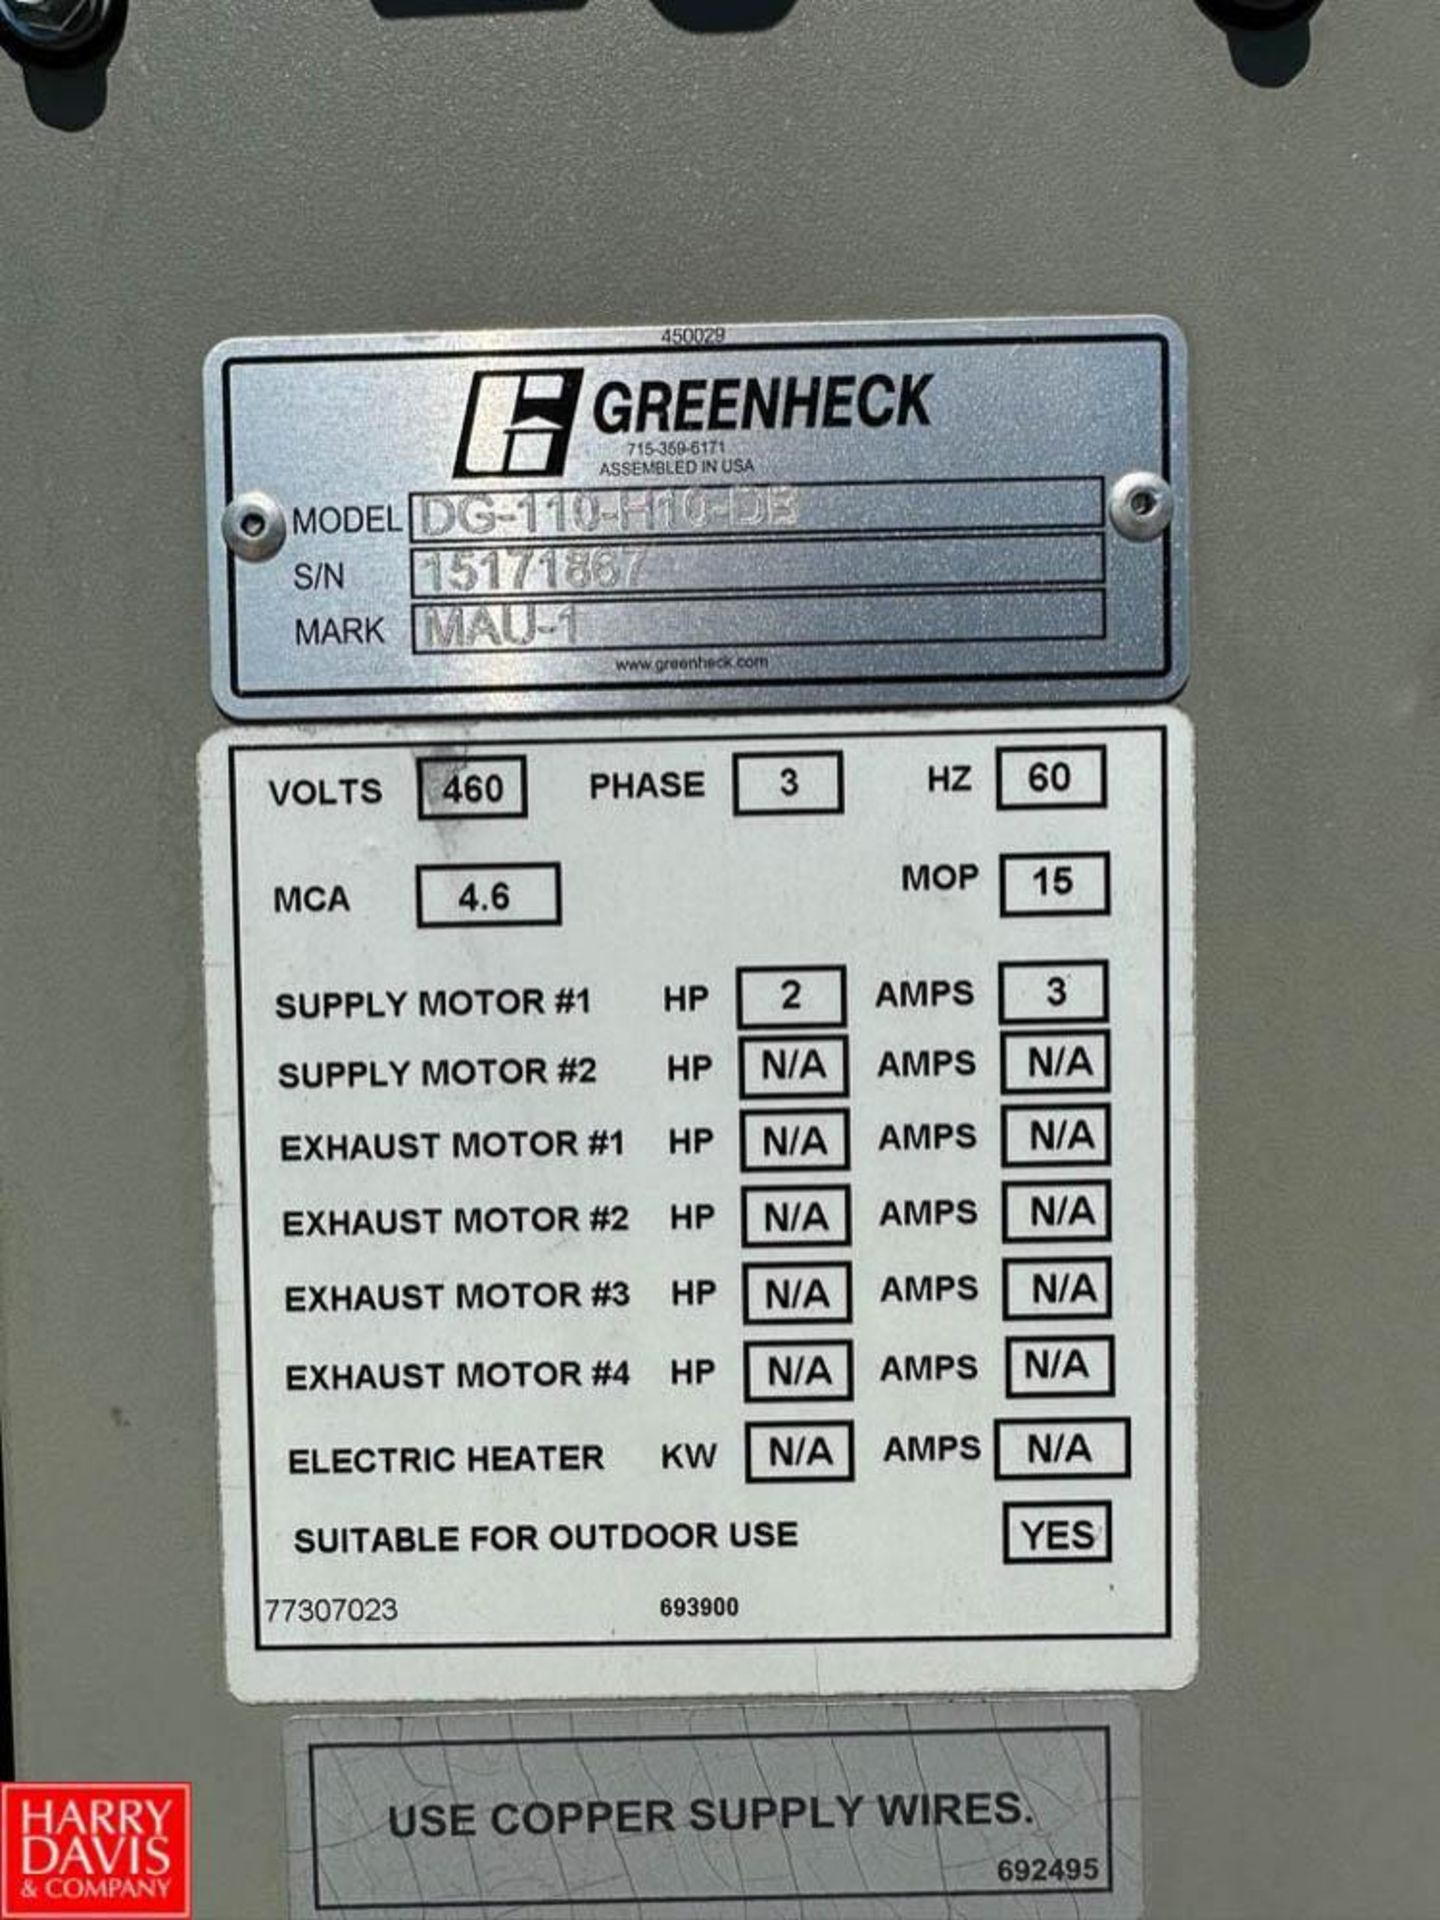 Greenheck Direct Gas-Fired Make-Up Air Unit, Model: DG-110-H10-DB, S/N: 15171867 - Image 2 of 2